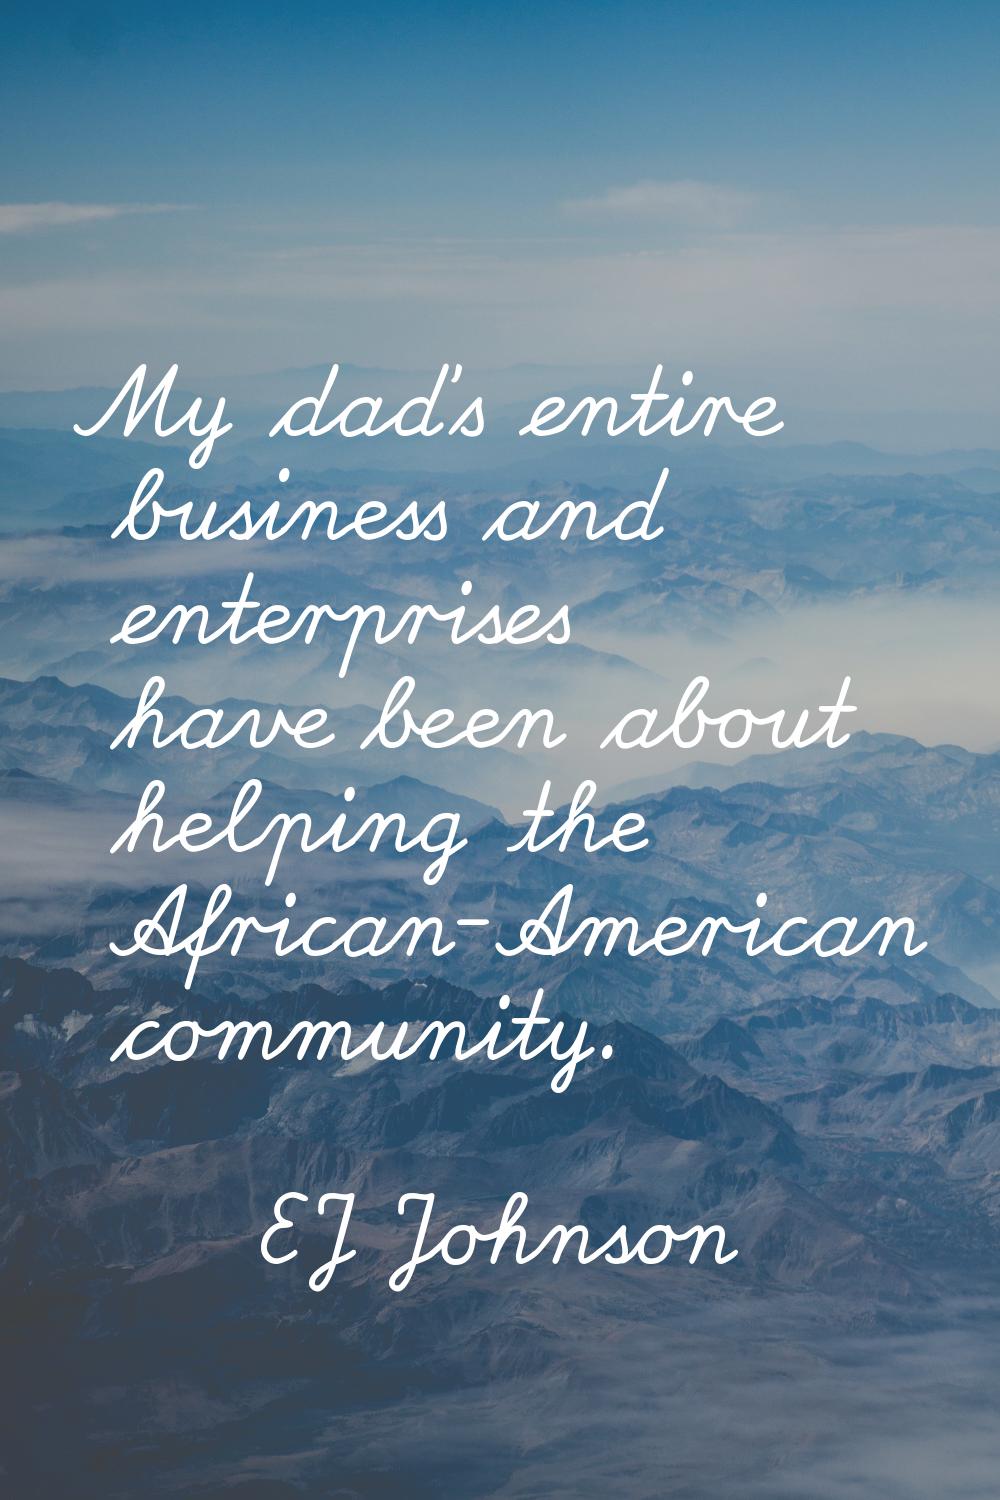 My dad's entire business and enterprises have been about helping the African-American community.